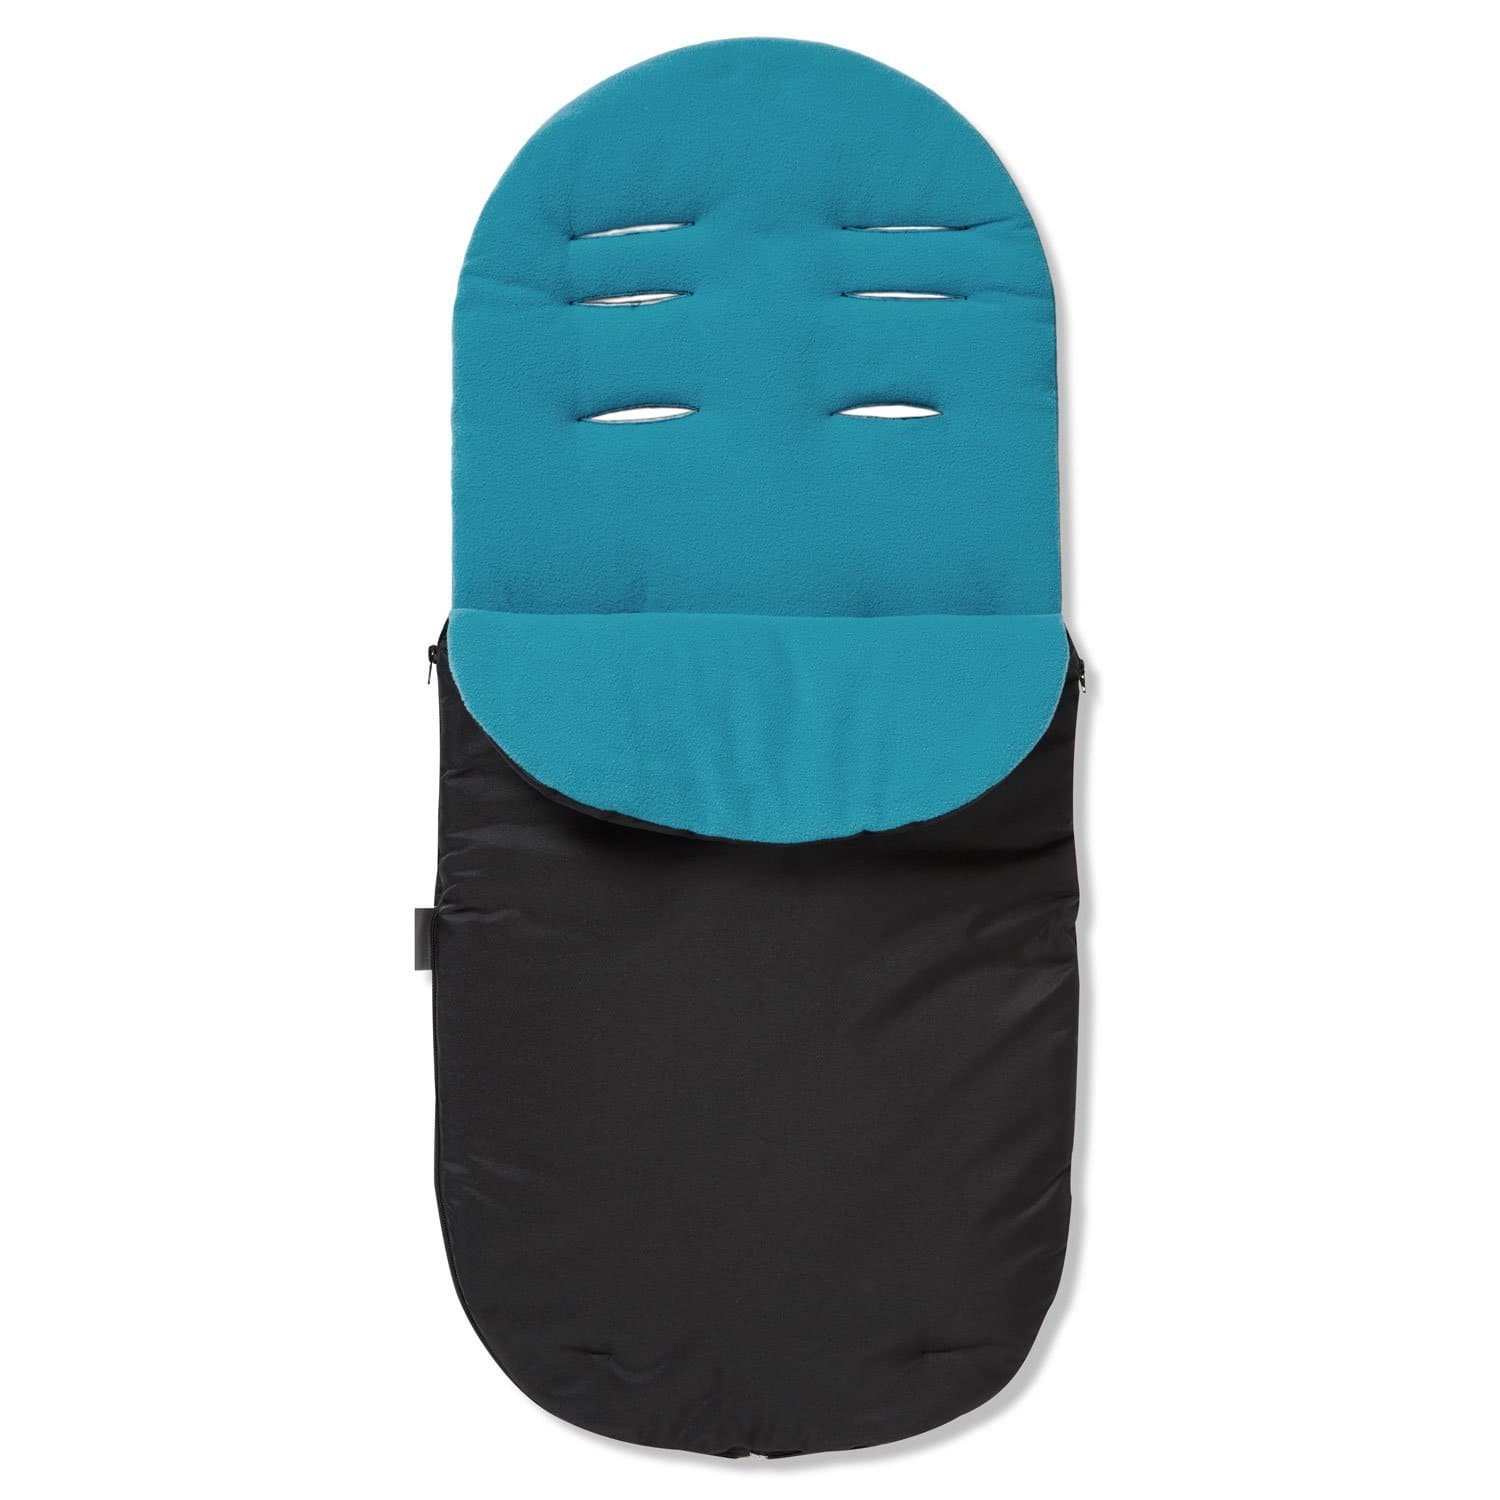 Footmuff / Cosy Toes Compatible with Diono - Turquoise / Fits All Models | For Your Little One